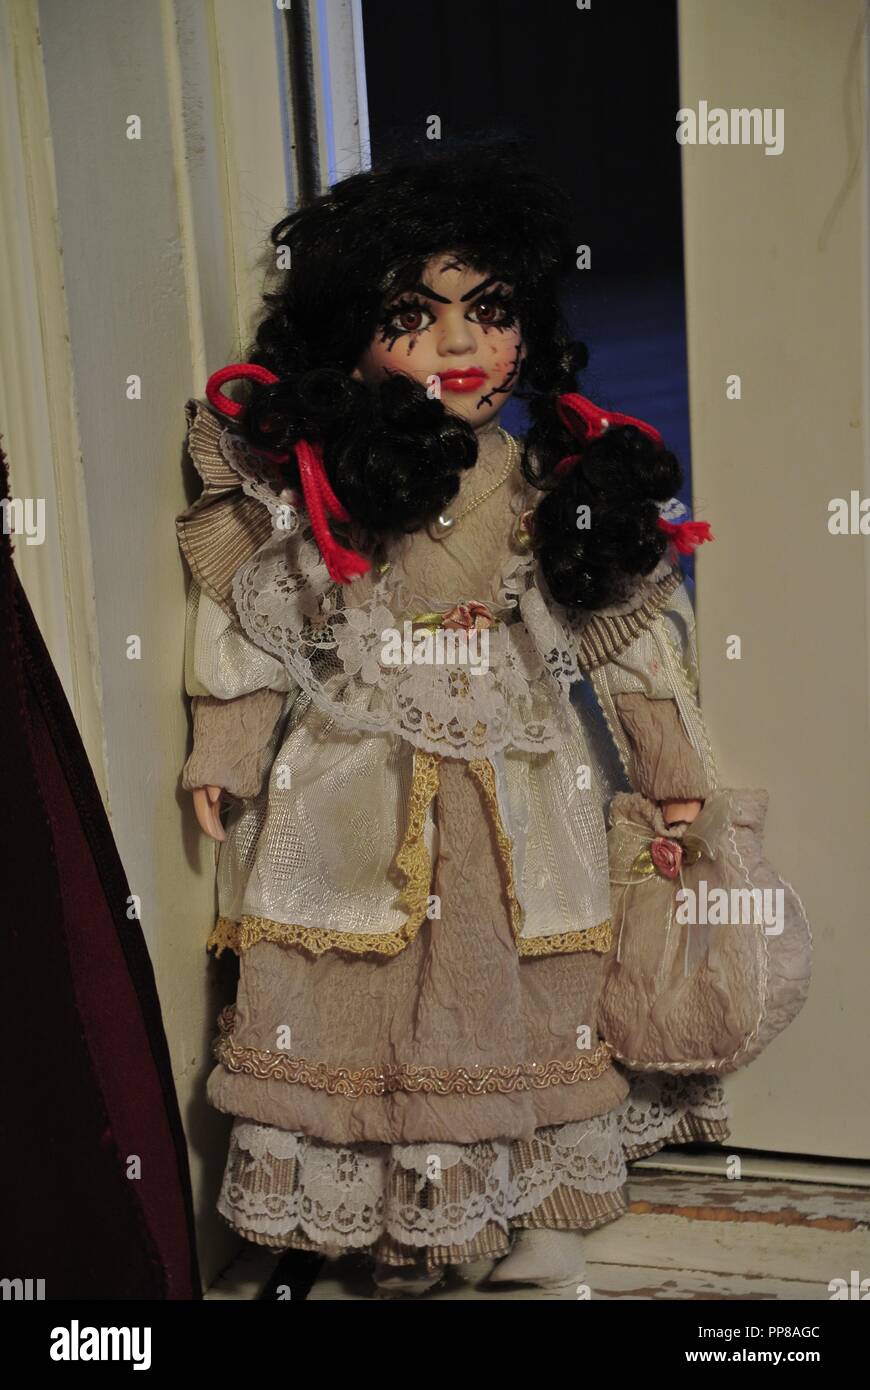 scary black doll